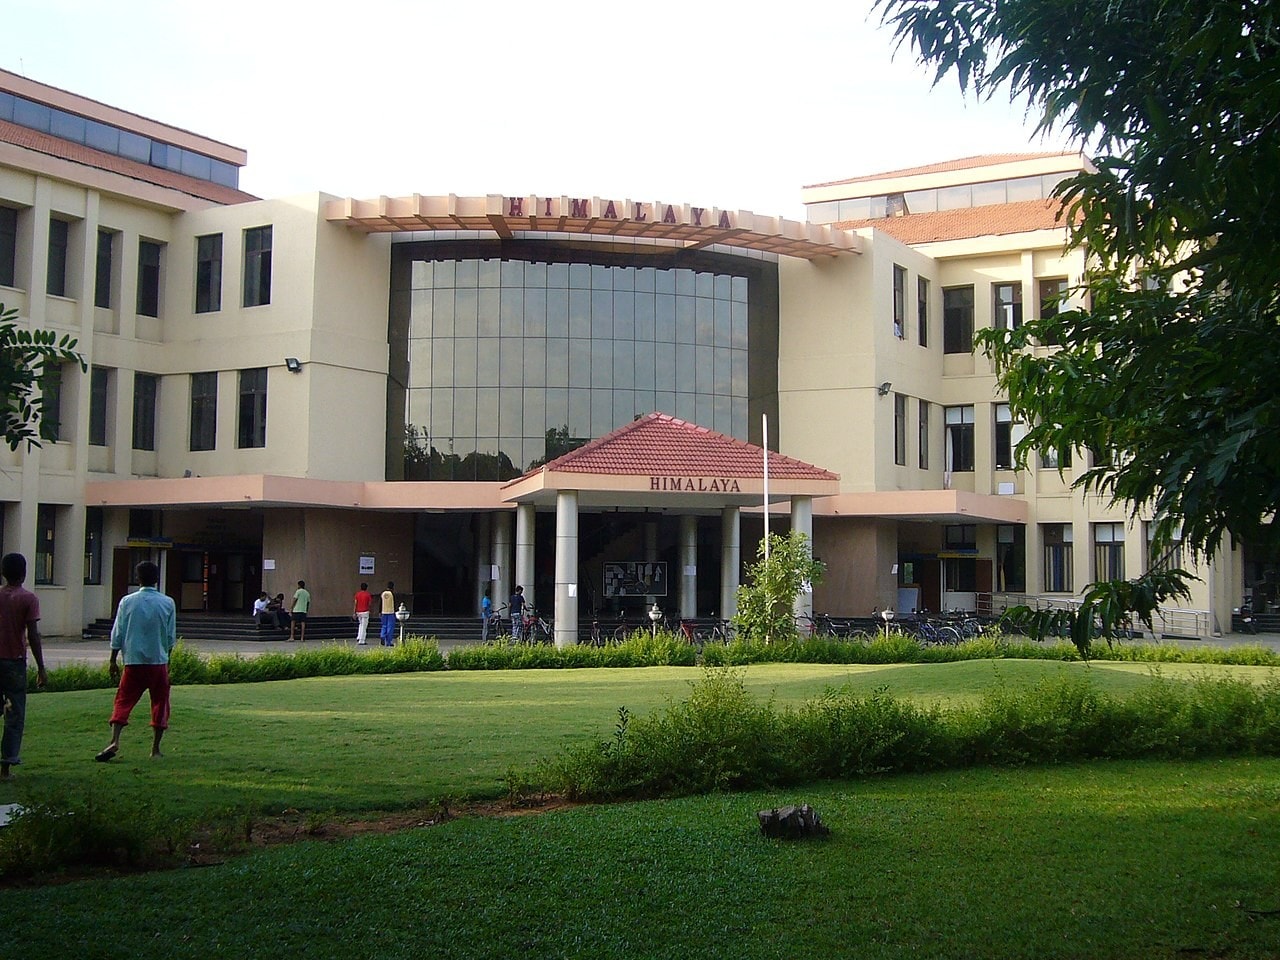 Indian Institute of Technology Madras